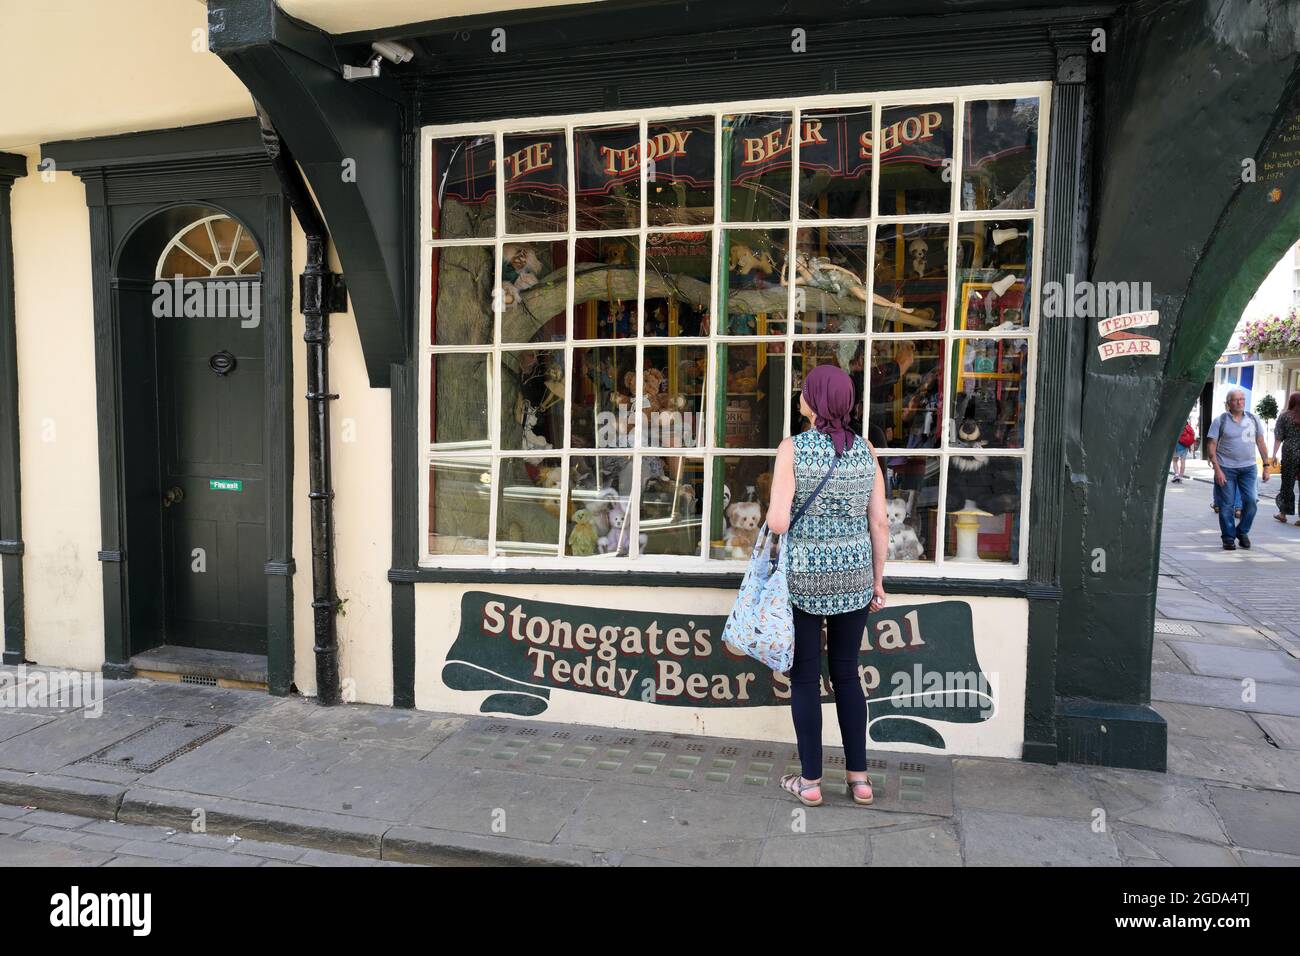 Woman Looking In The Shop Window Of Stonegate's Original Teddy Bear Shop In The City Of York Yorkshire England UK Stock Photo